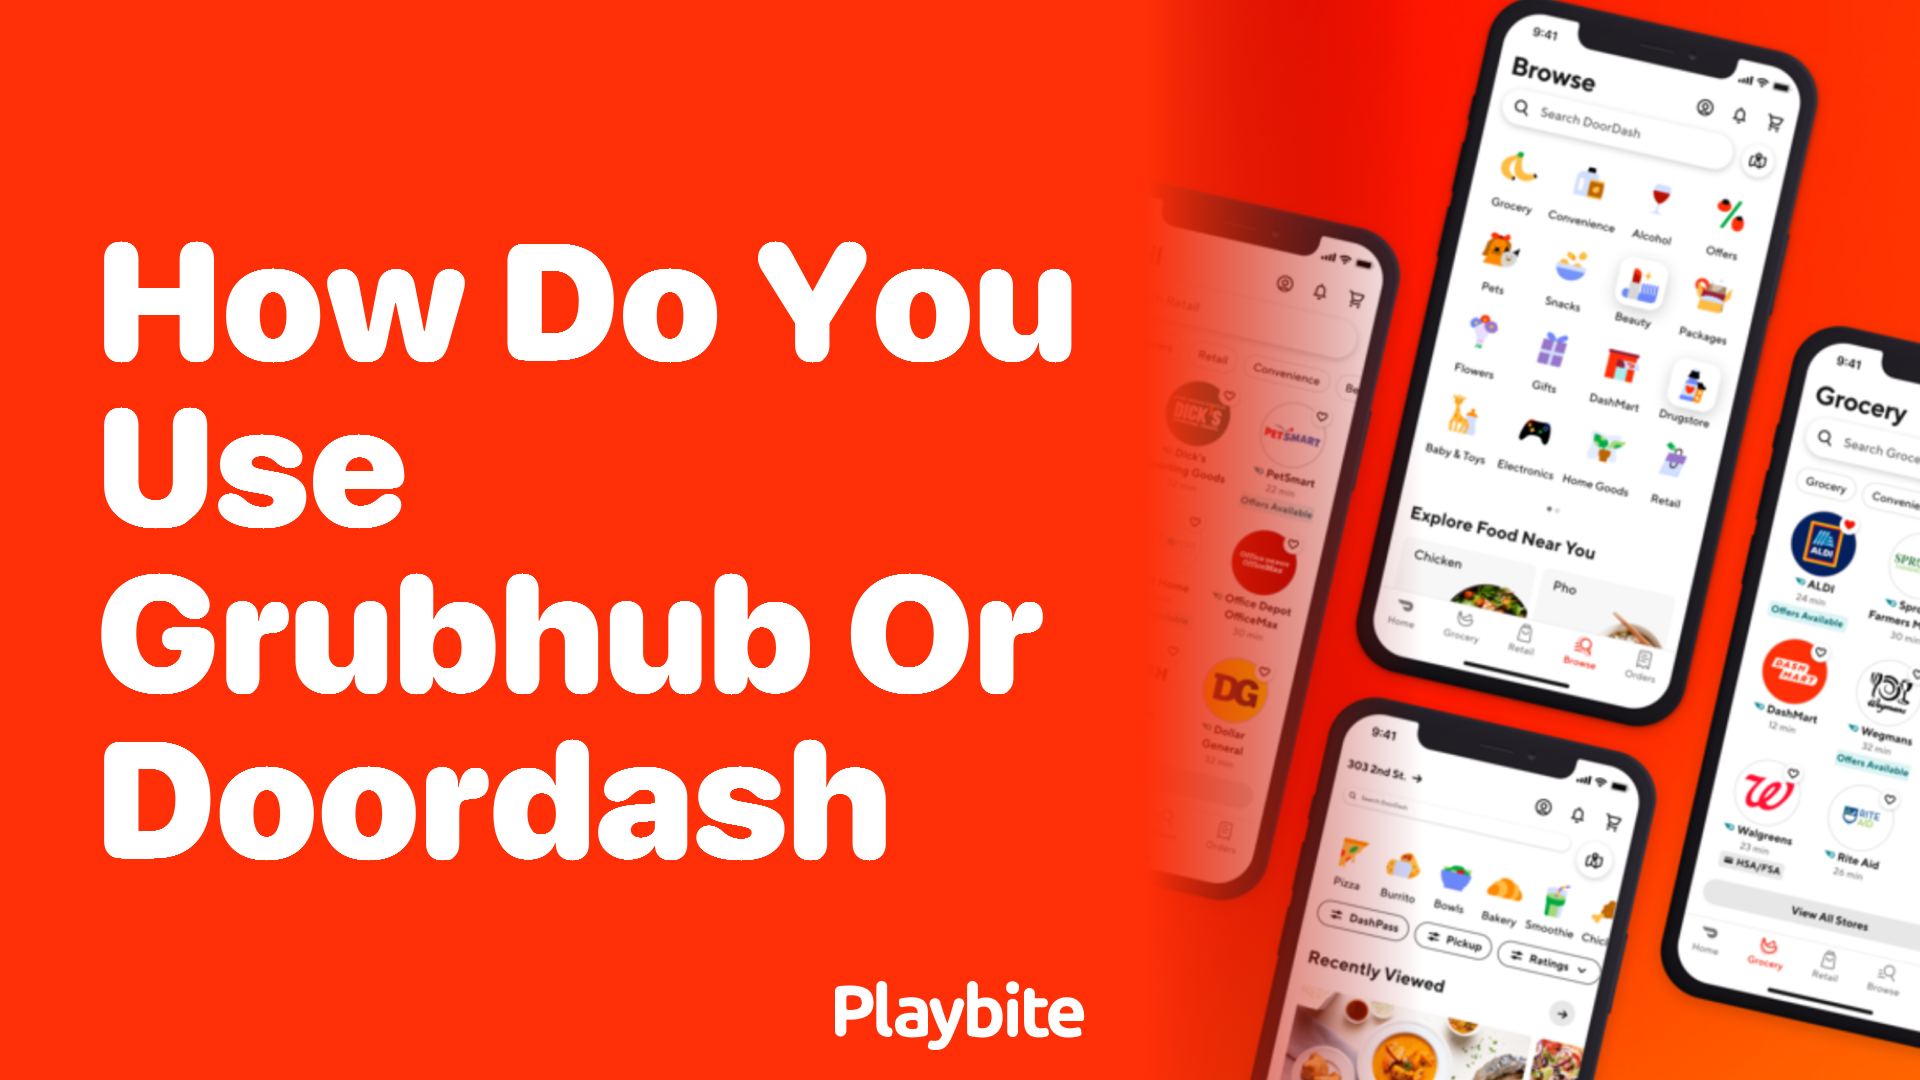 How Do You Use Grubhub or DoorDash for Easy Food Delivery?